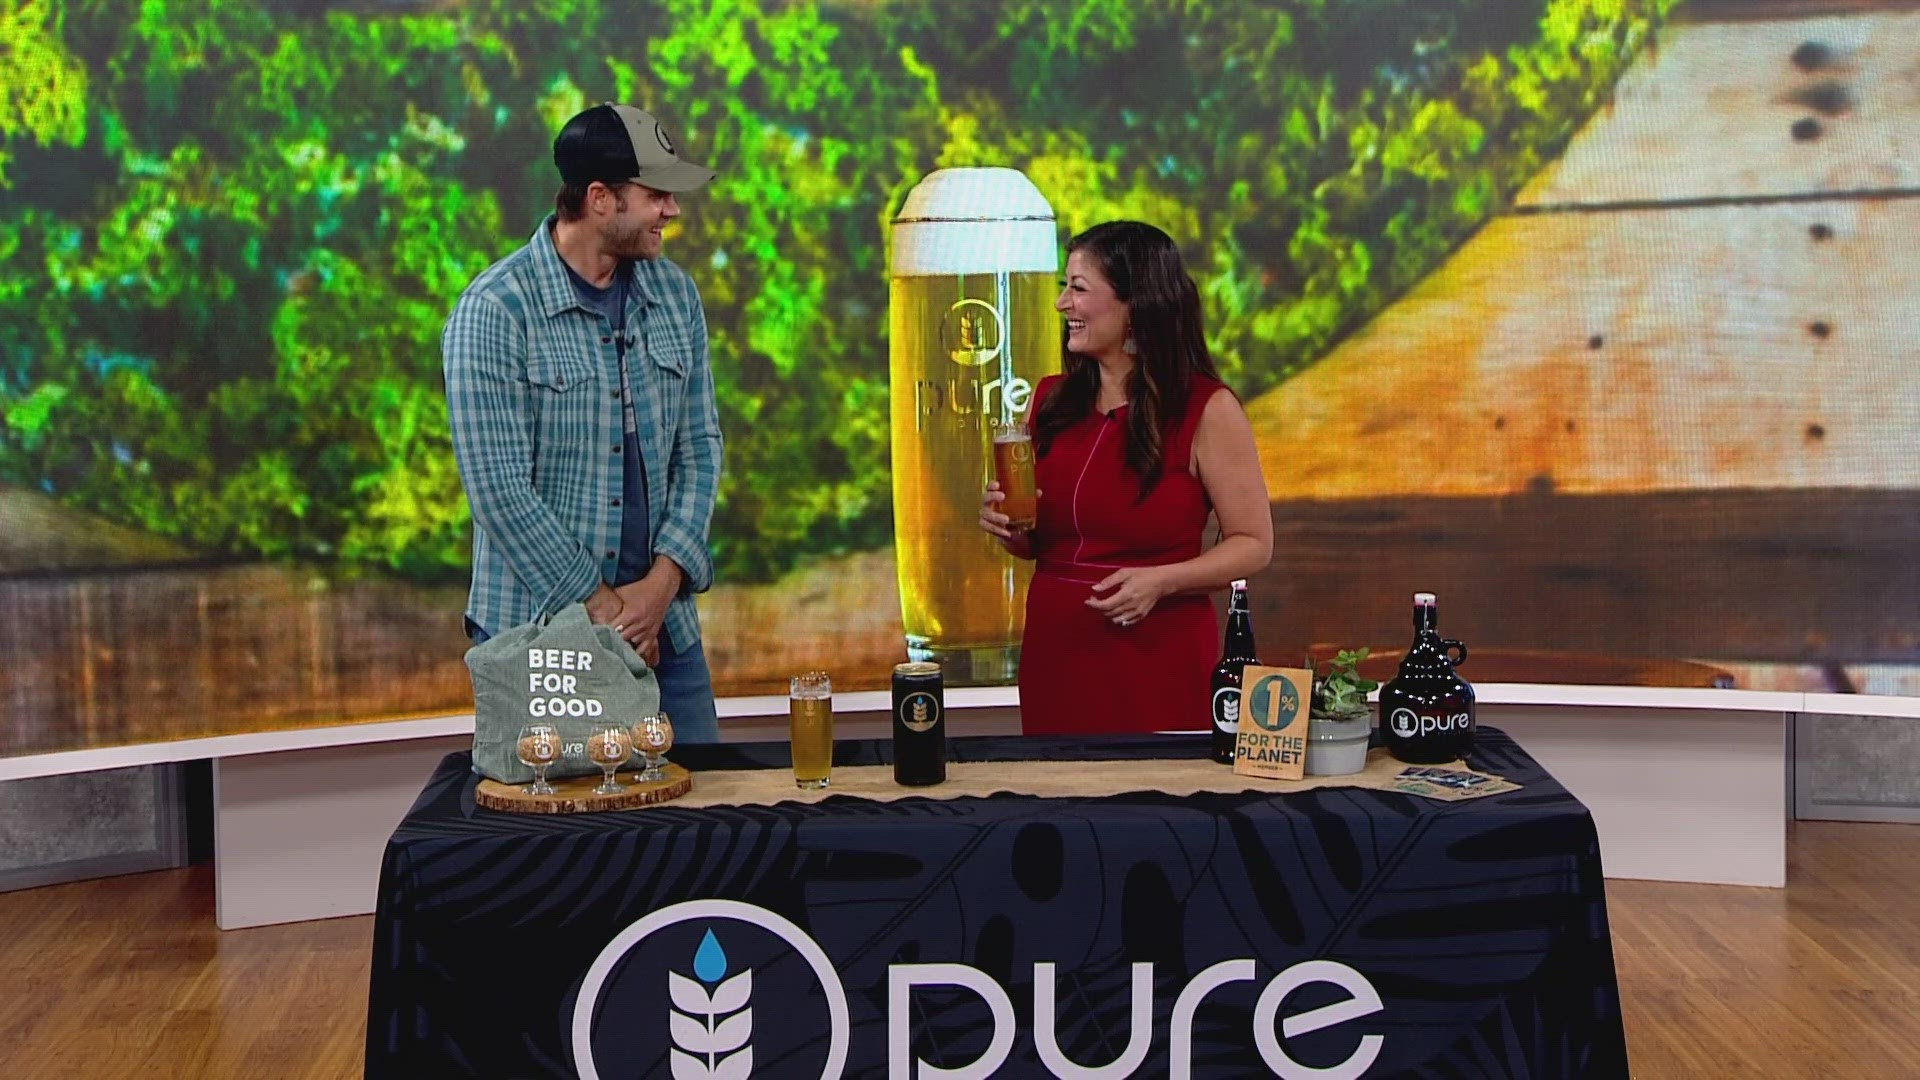 Mat Robar, Co-Founder, of Pure Project joined CBS 8 to talk about the deeply rooted perennial grain that can sequester carbon from the air.